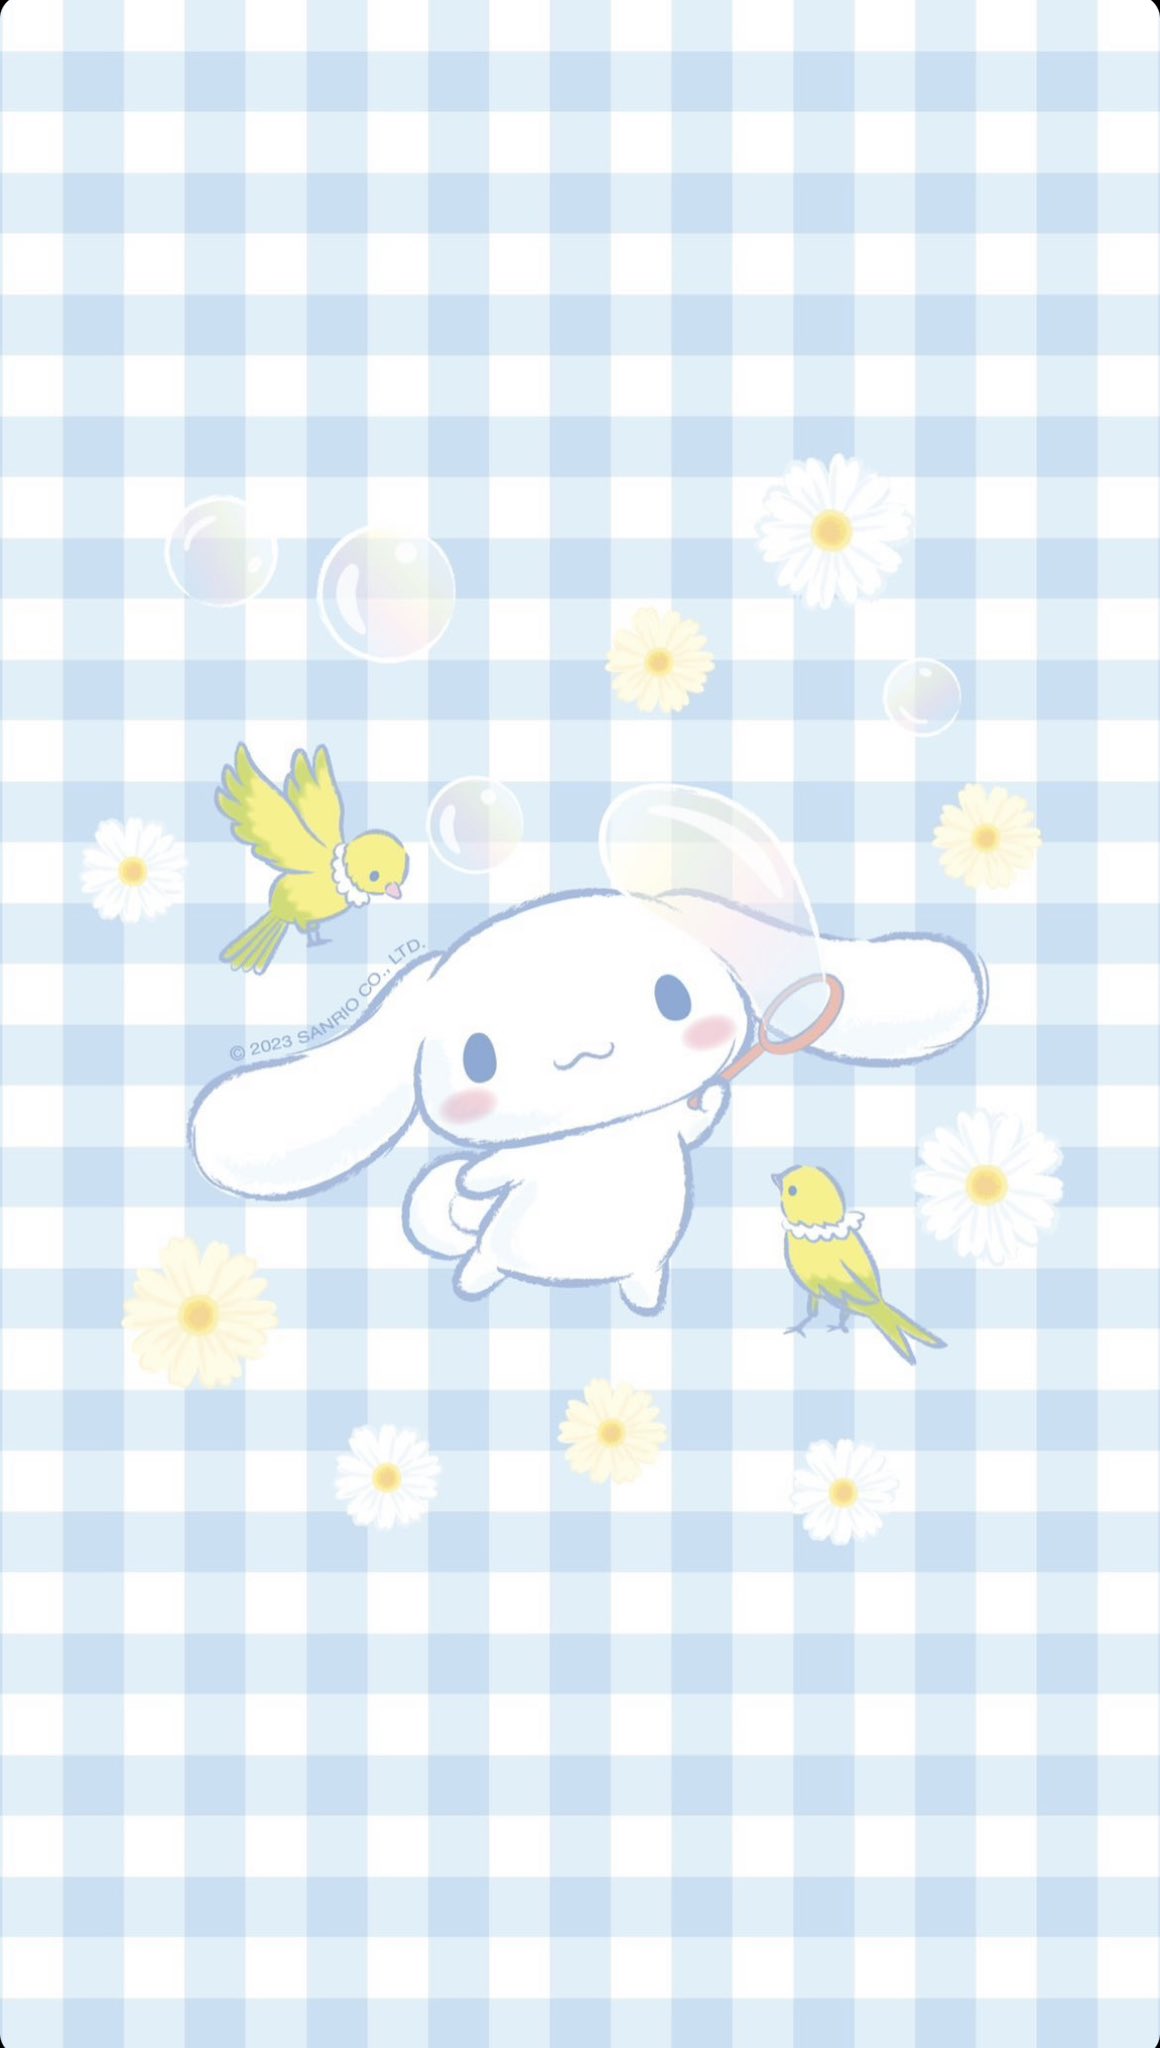 sanrio daily ✨ month's cinnamoroll wallpaper just dropped